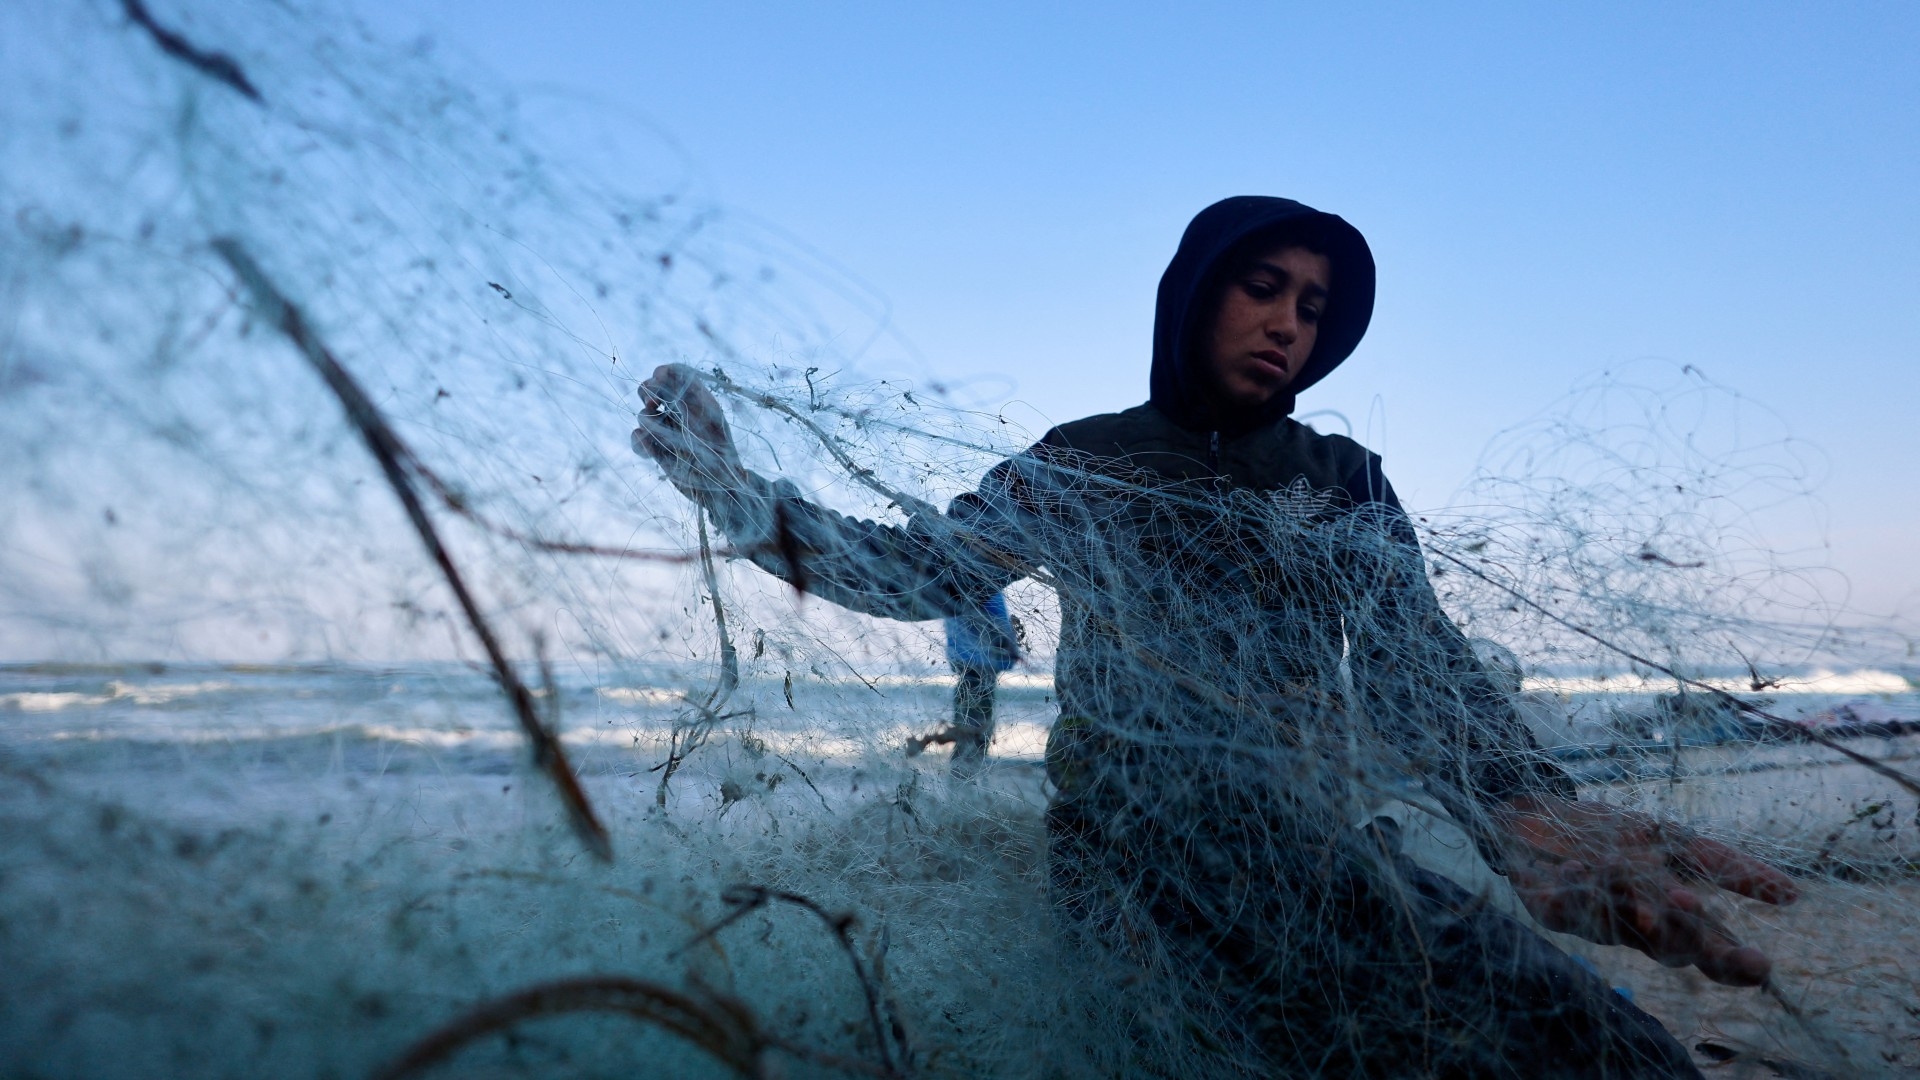 A Palestinian boy looks at a fishing net on the beach in Rafah, in the southern Gaza Strip, 16 January (Reuters/Mohammed Salem)